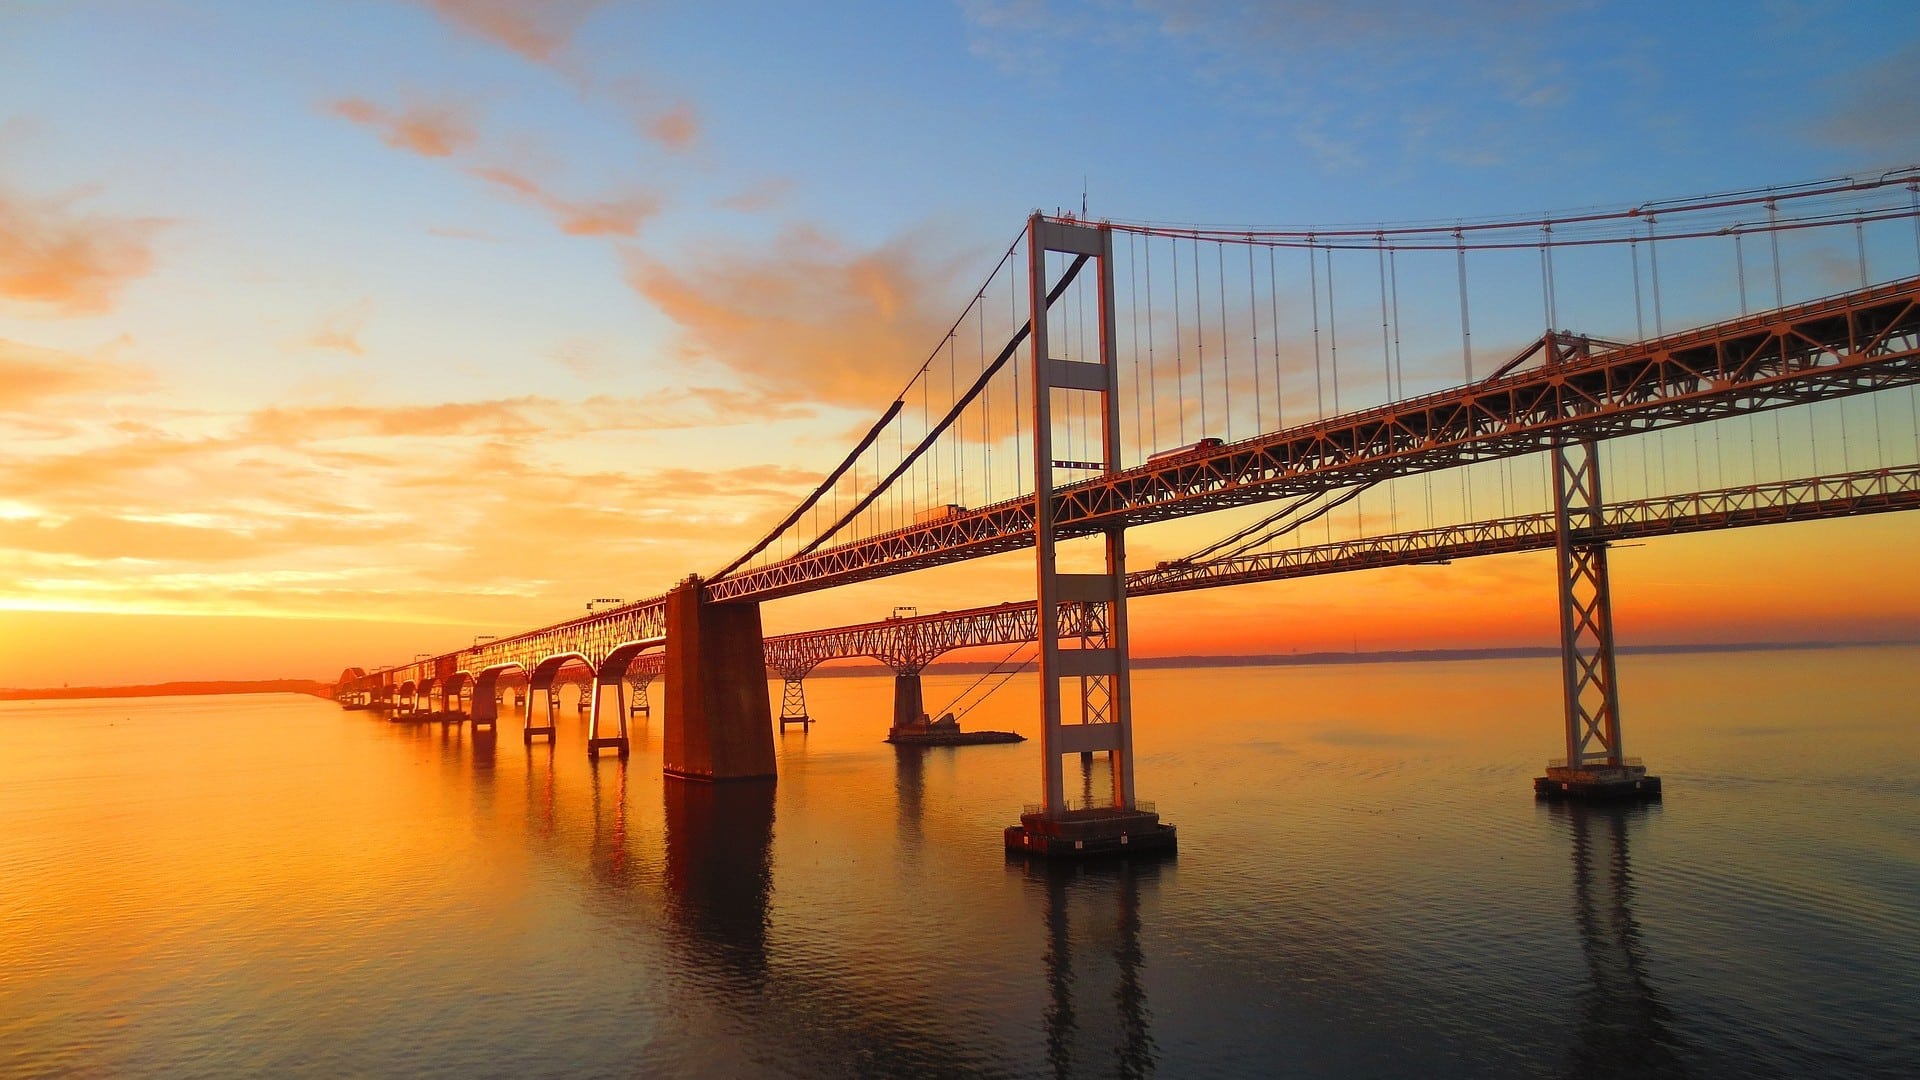 An expansive suspension bridge over a large body of water at sunset